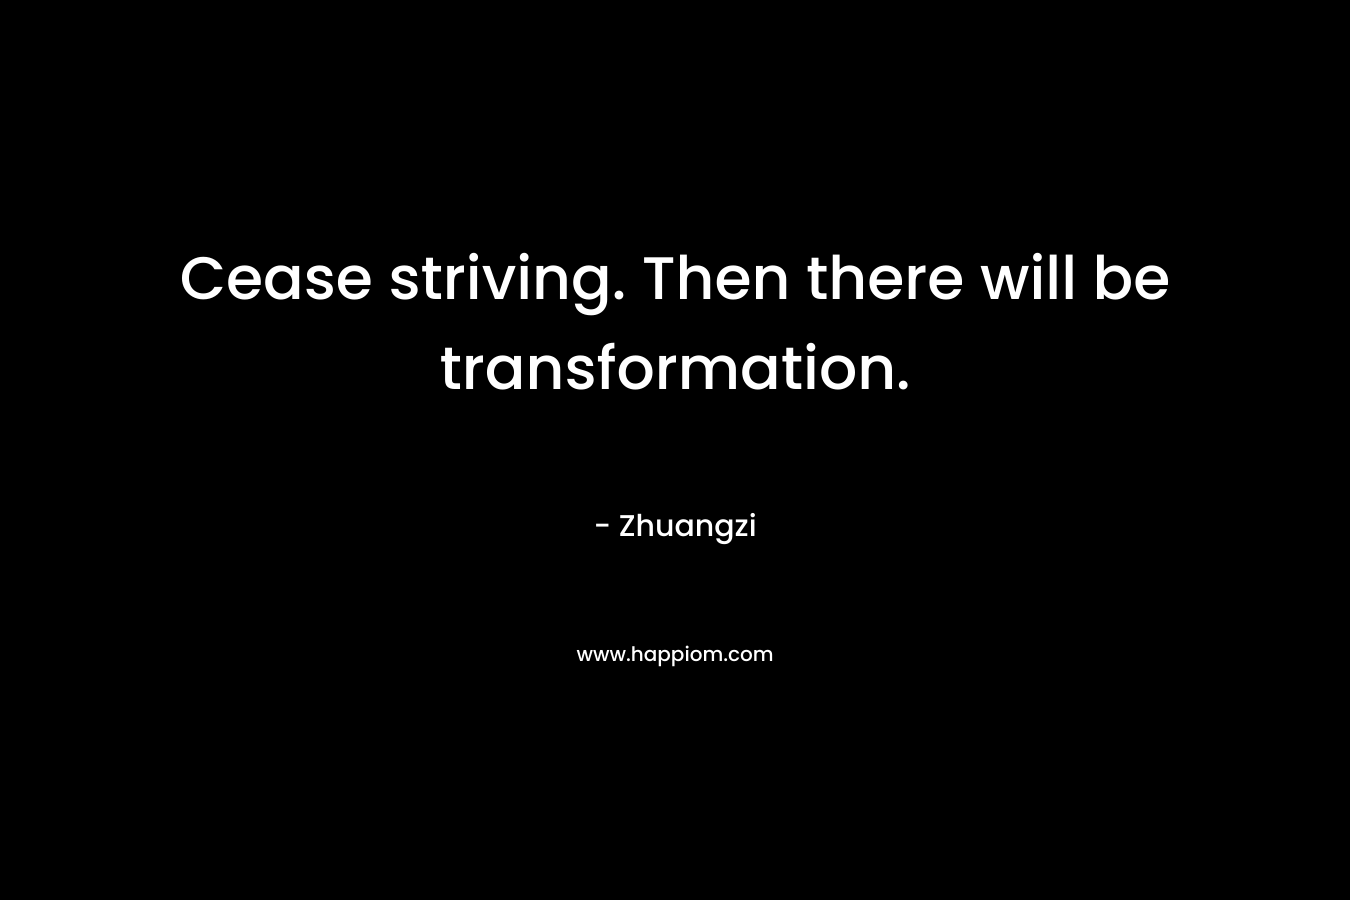 Cease striving. Then there will be transformation. – Zhuangzi